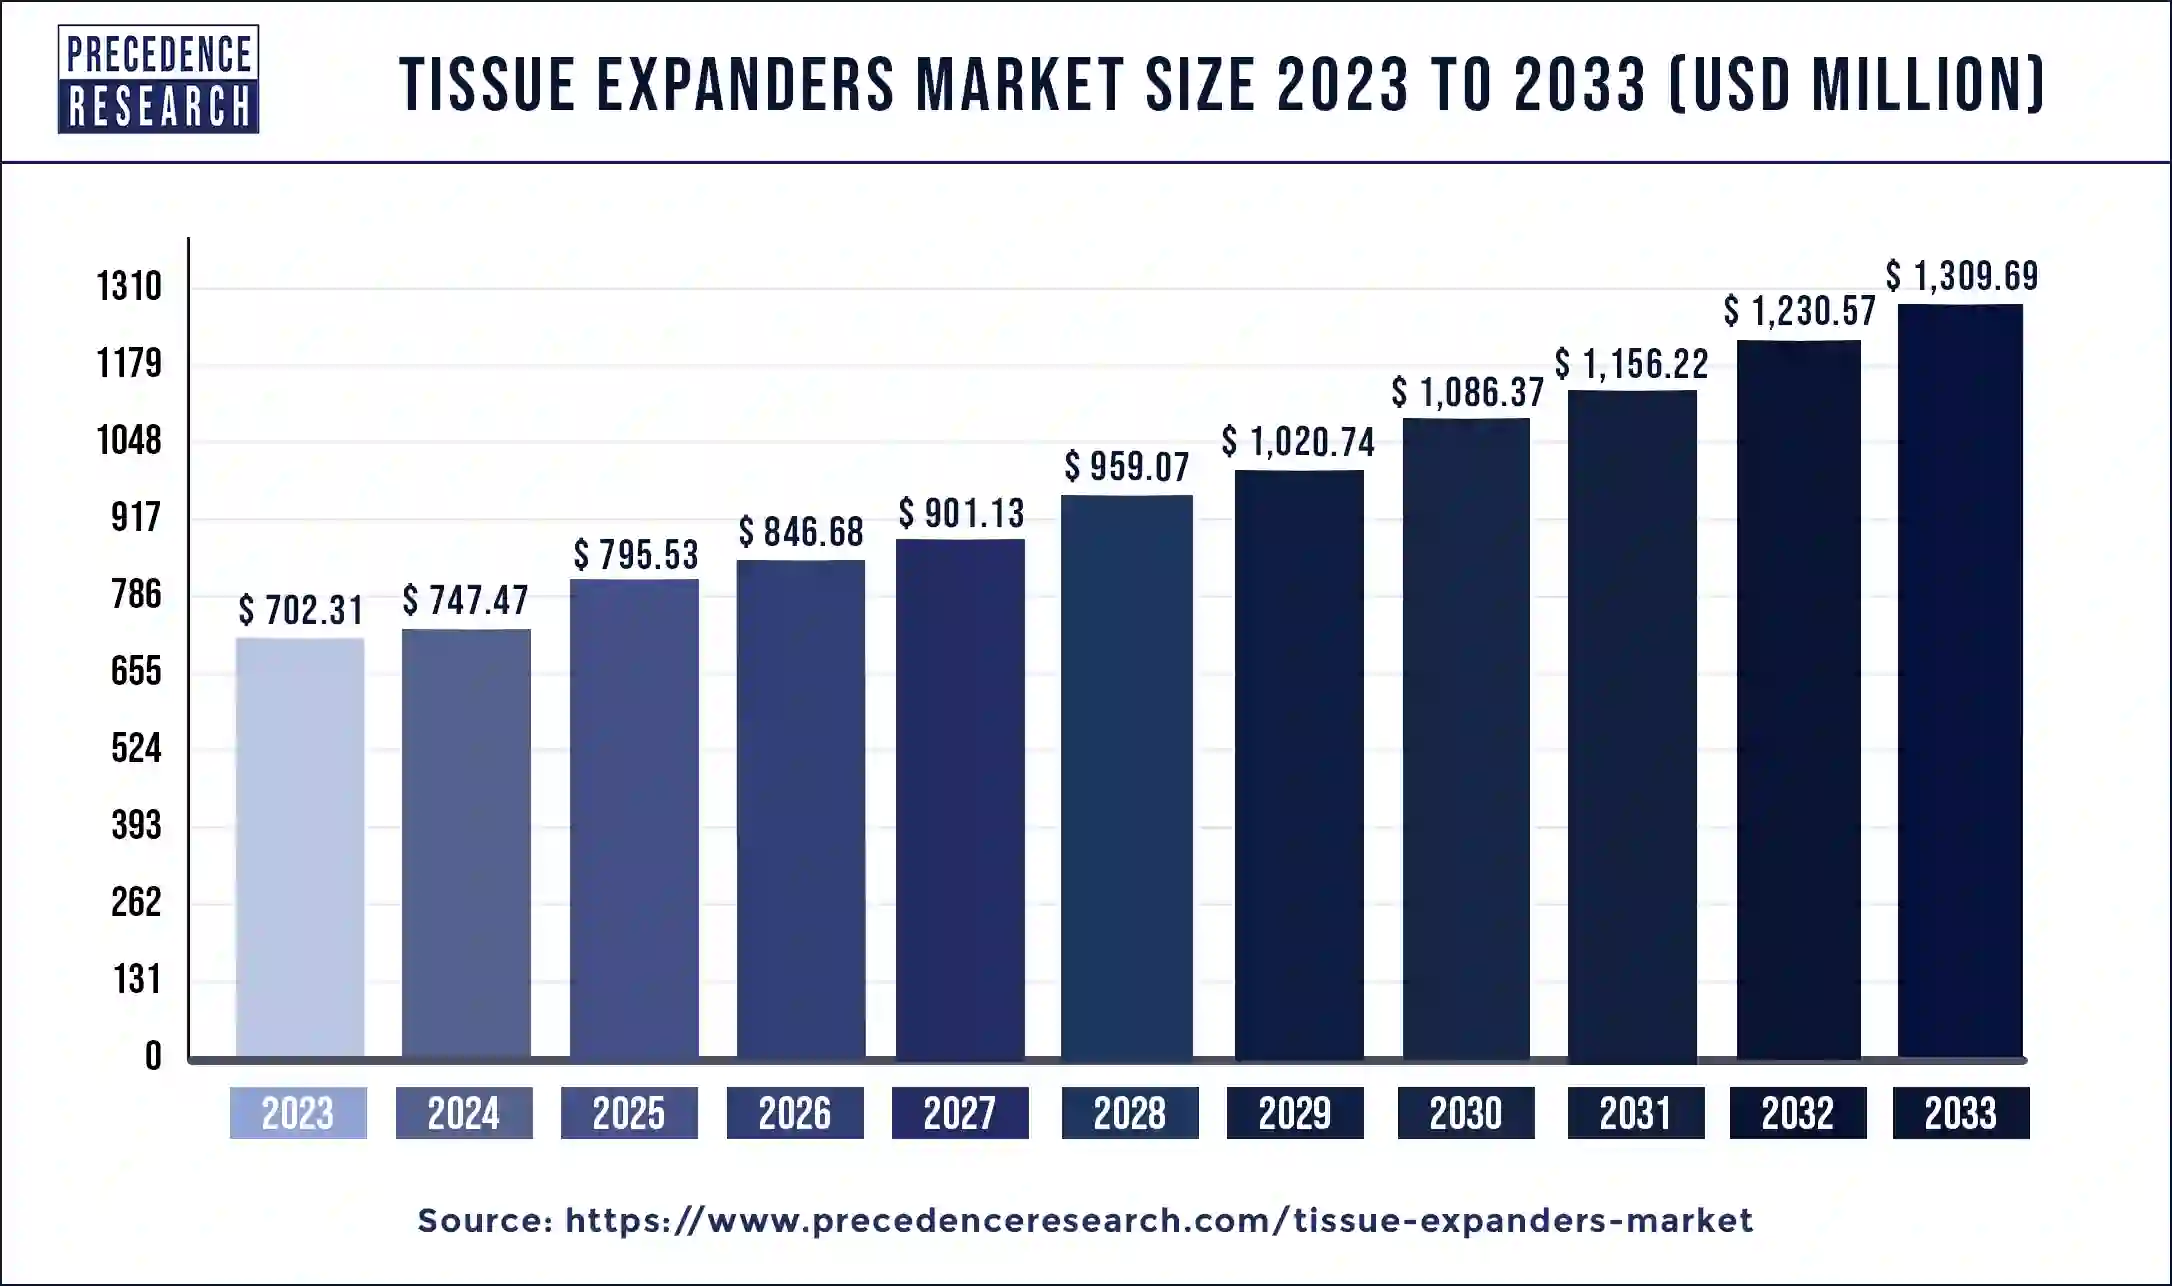 Tissue Expanders Market Size 2024 to 2033